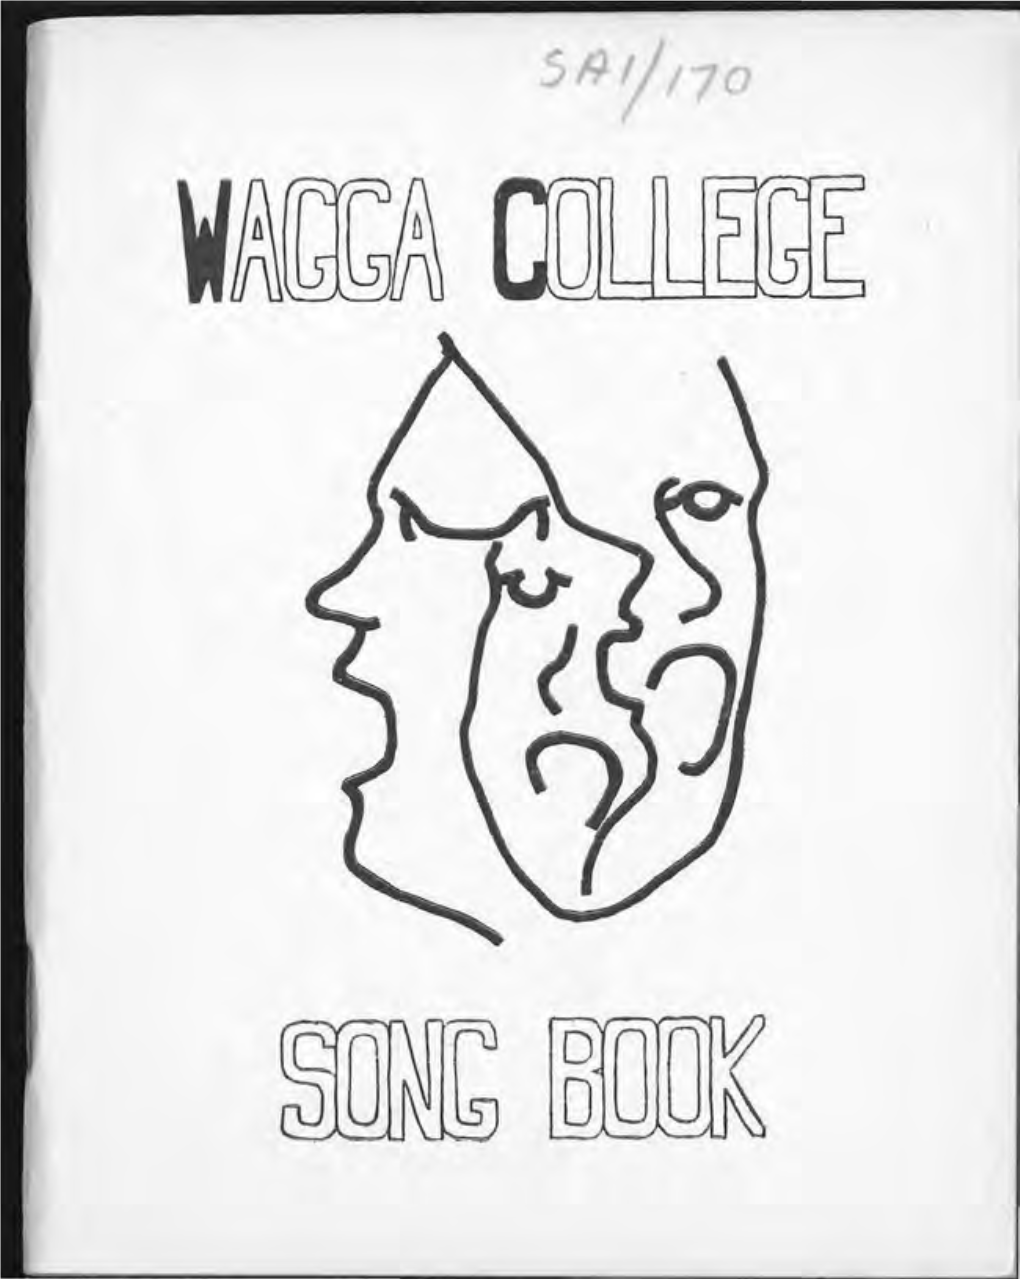 Wagga-College-Song-Book-N.D..Pdf